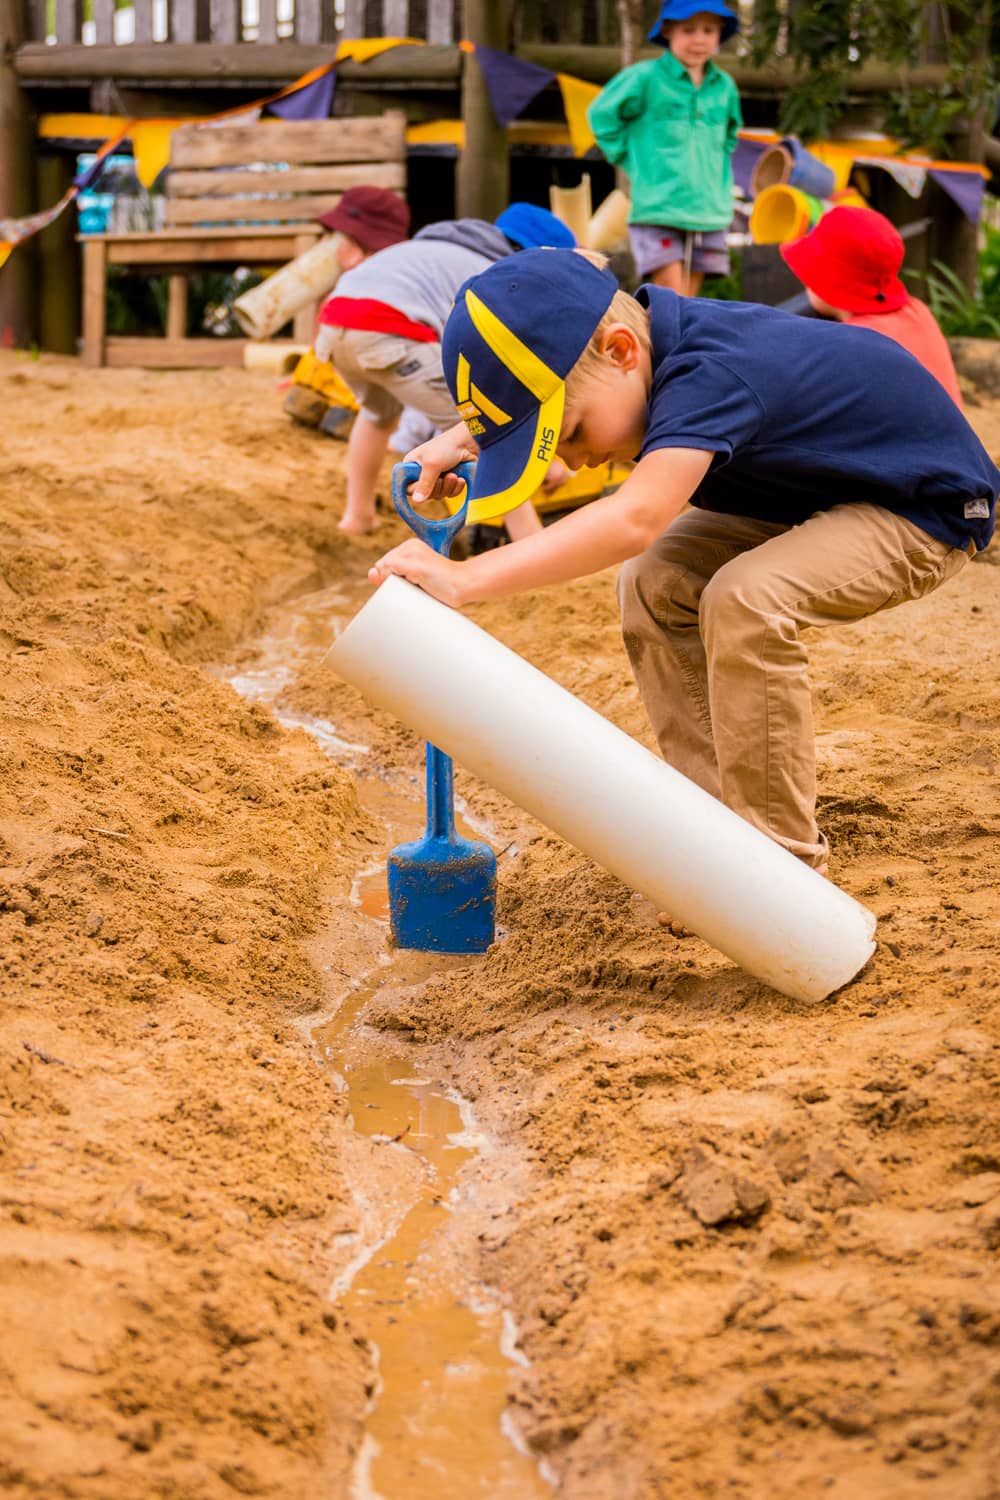 Children playing in kindy sandpit with spades and white pipe